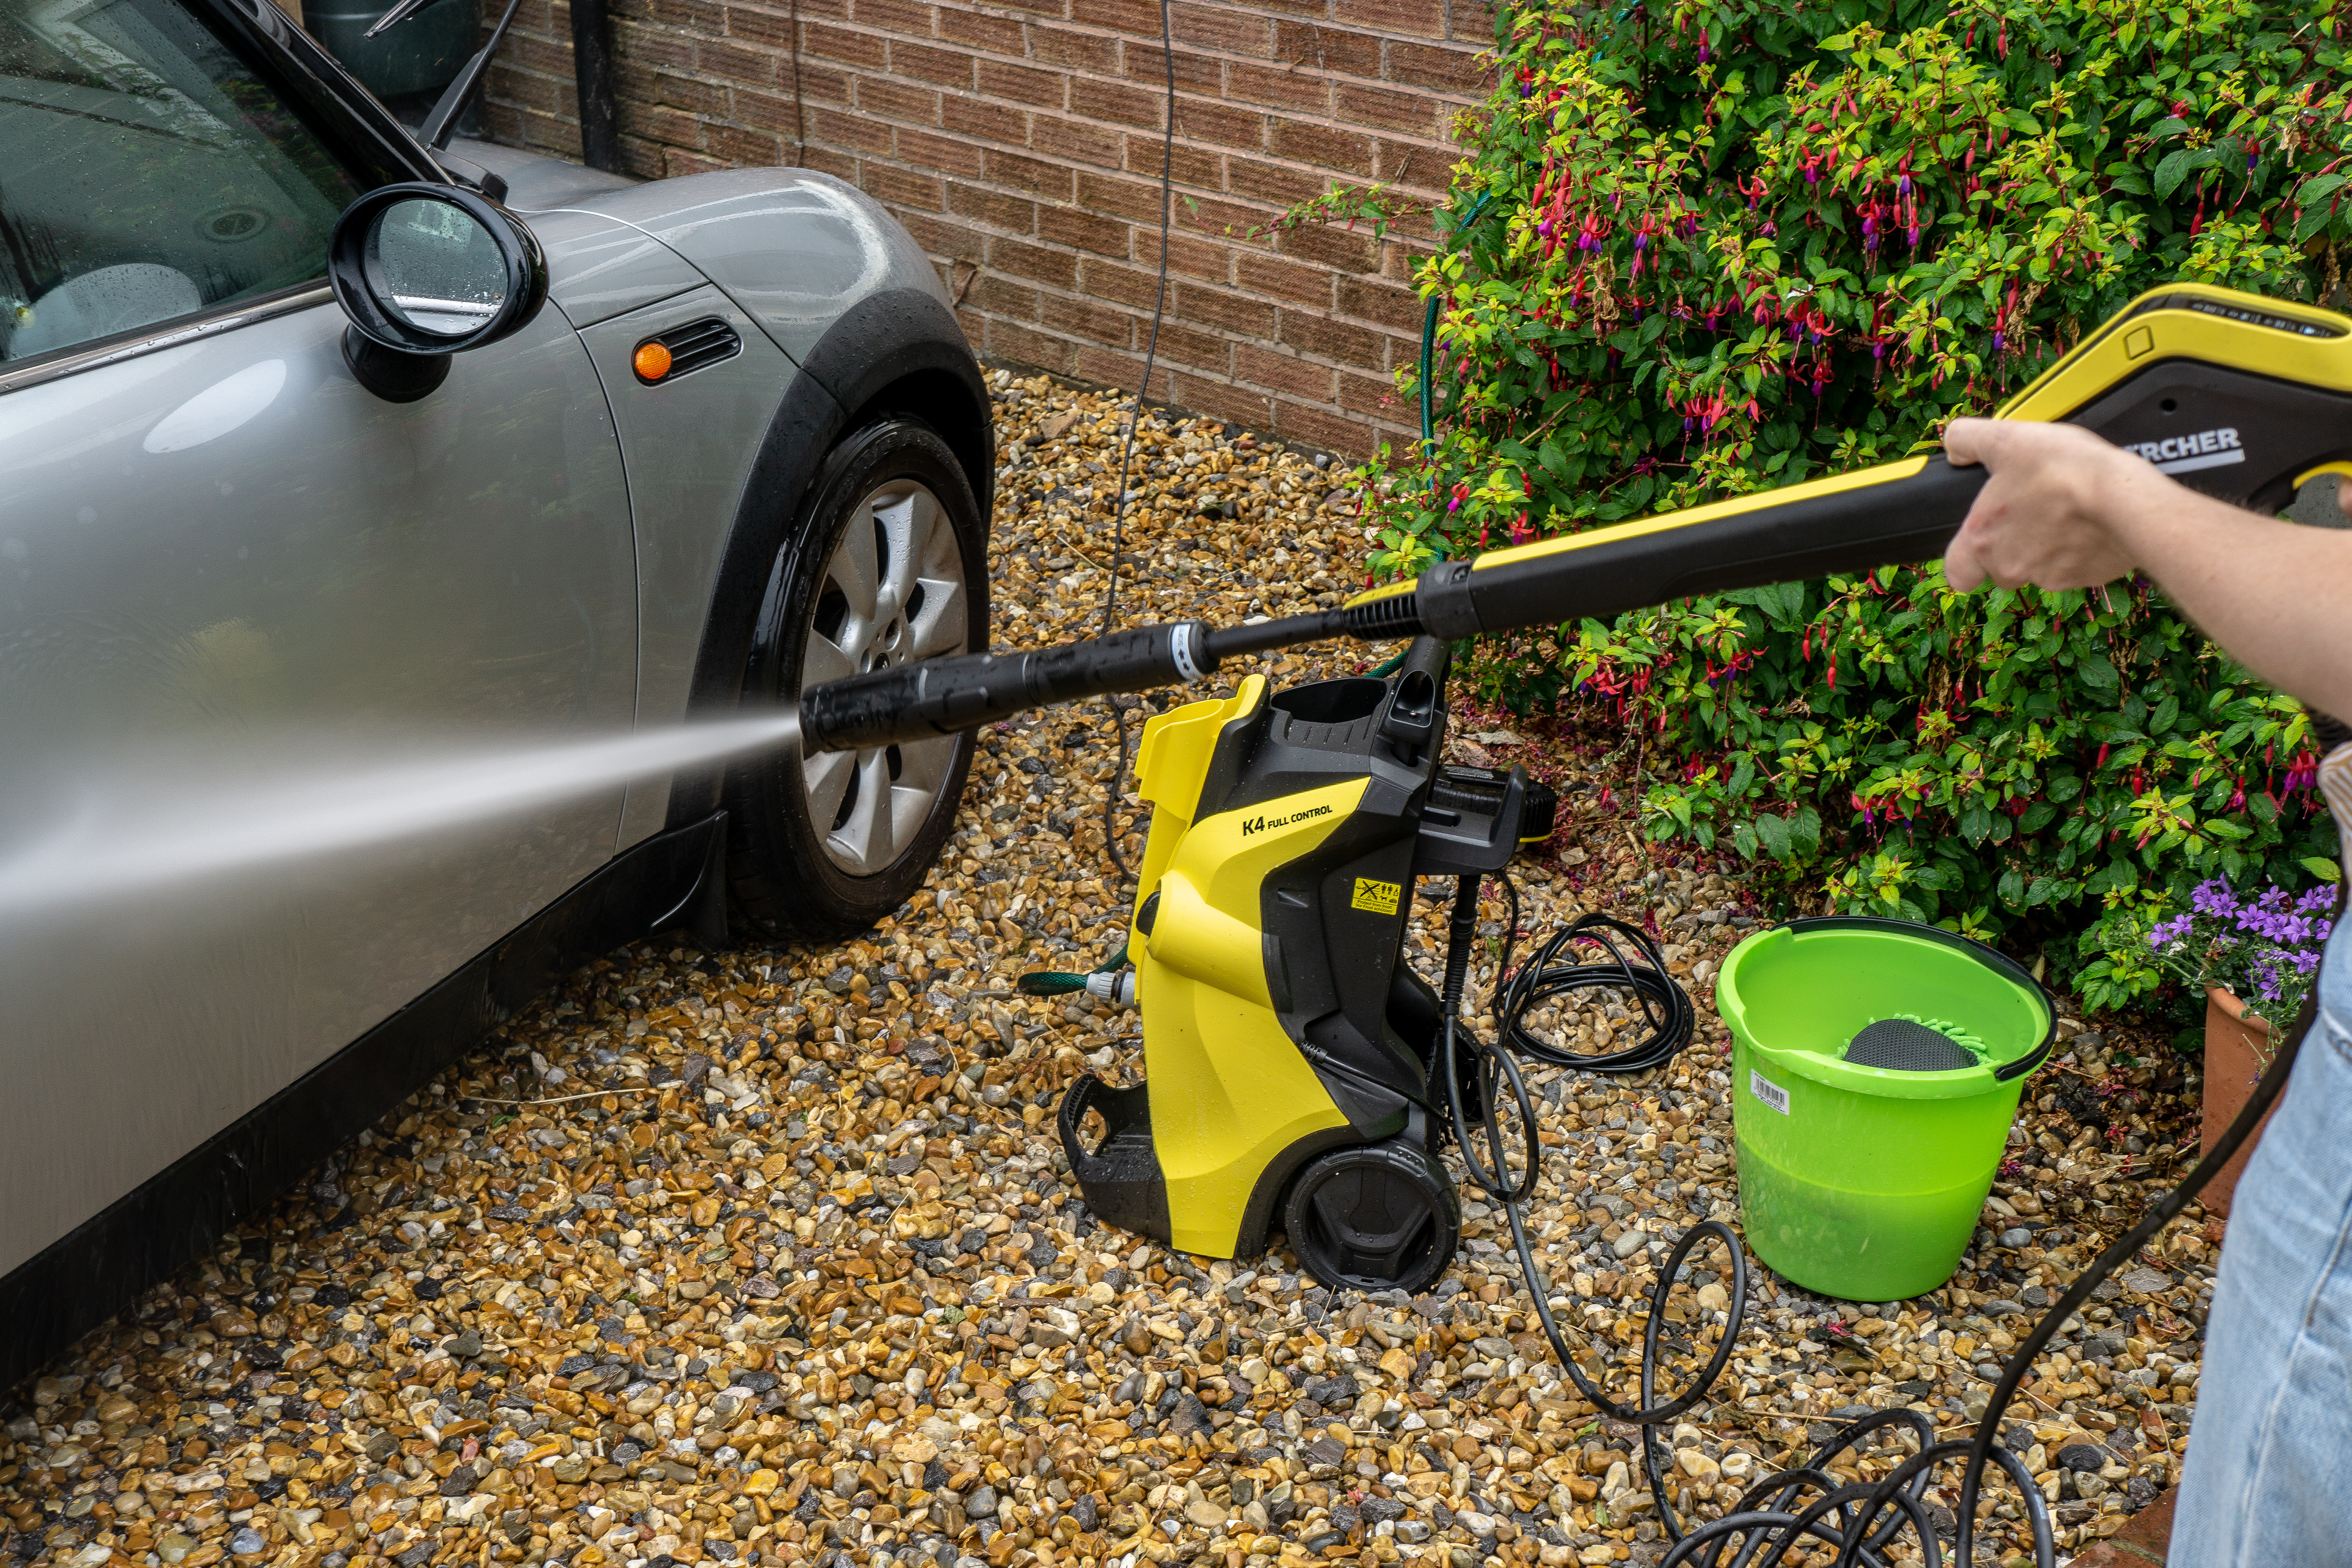 The Karcher's lance is easy to control